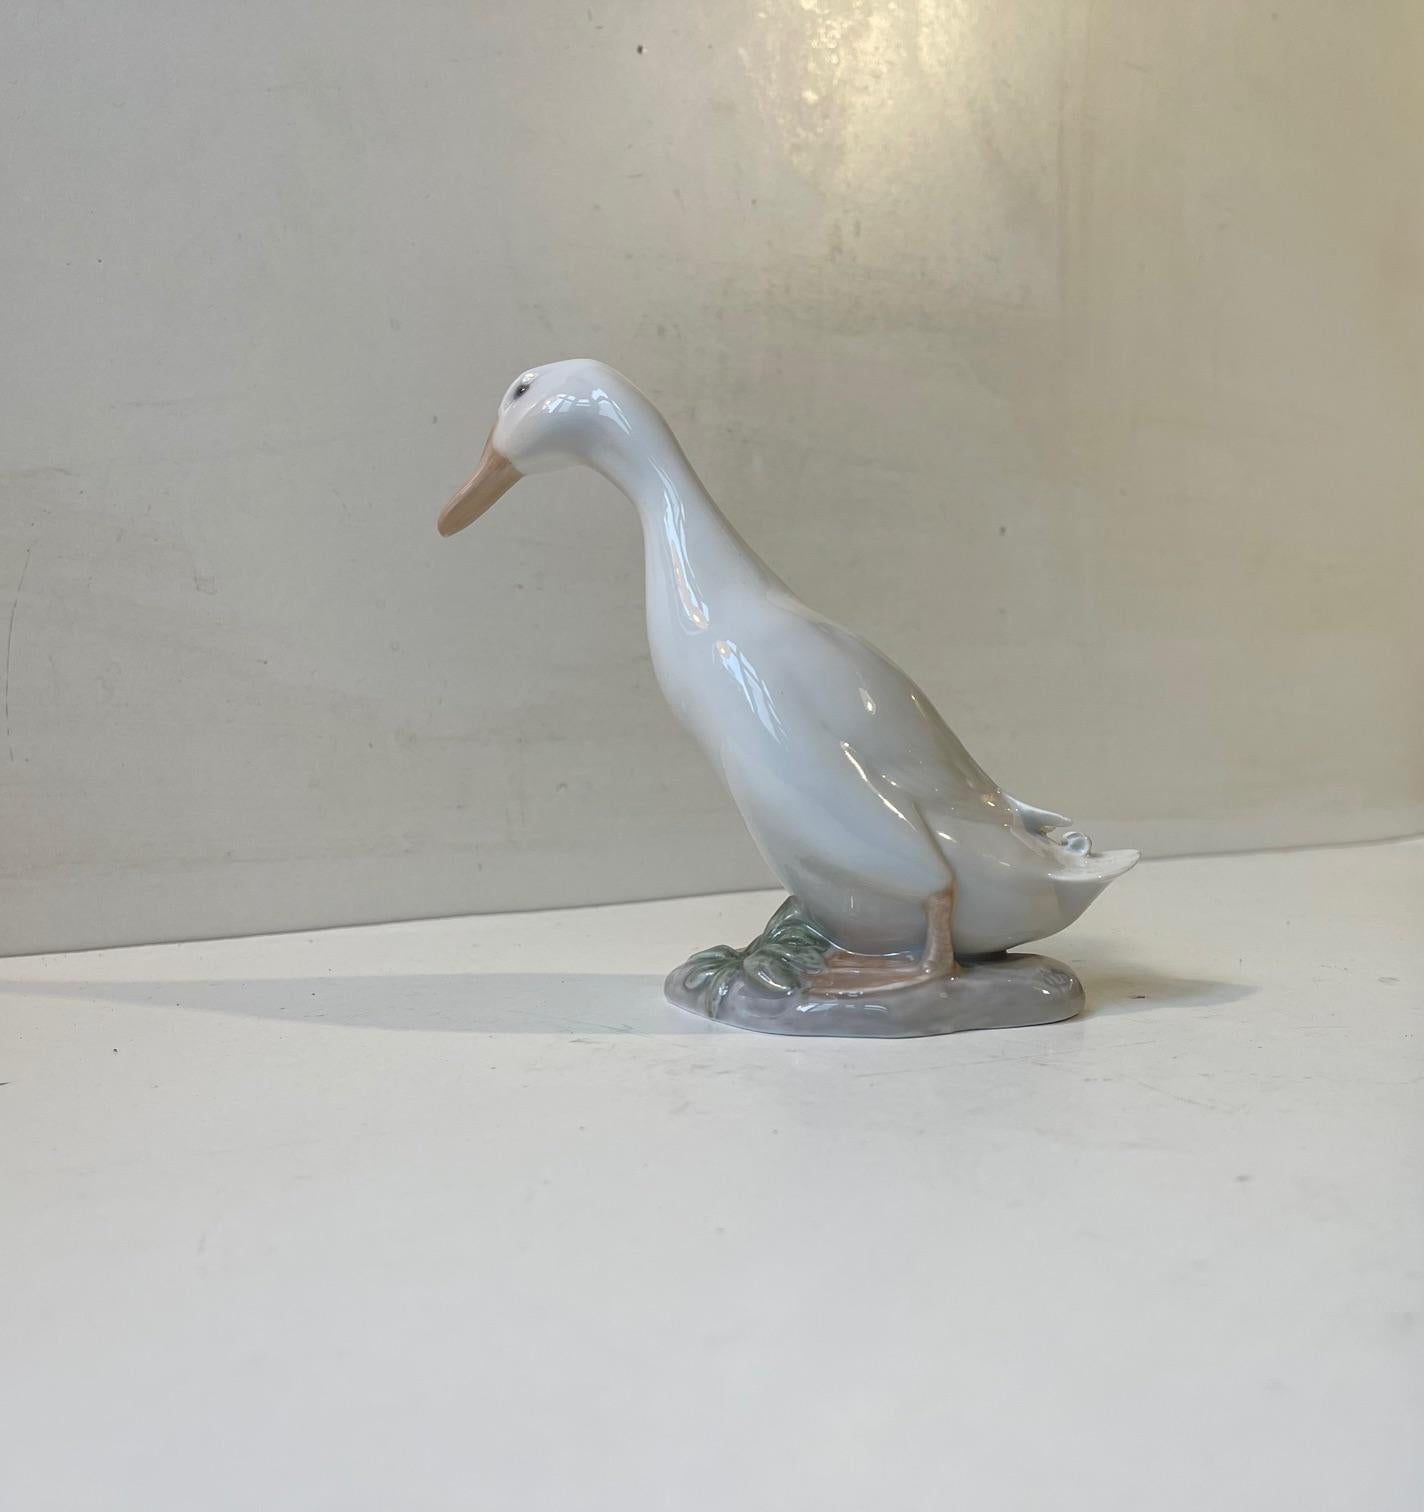 A rare white duck/drake porcelain figurine designed by Olaf Mathiesen from 1915-20. This one dessin nr. 2122 is clean, crips and intact. Fully marked, signed and made at Royal Copenhagen in Denmark in 1940.  

Measurements: H:14/15cm, Dept 11 cm.